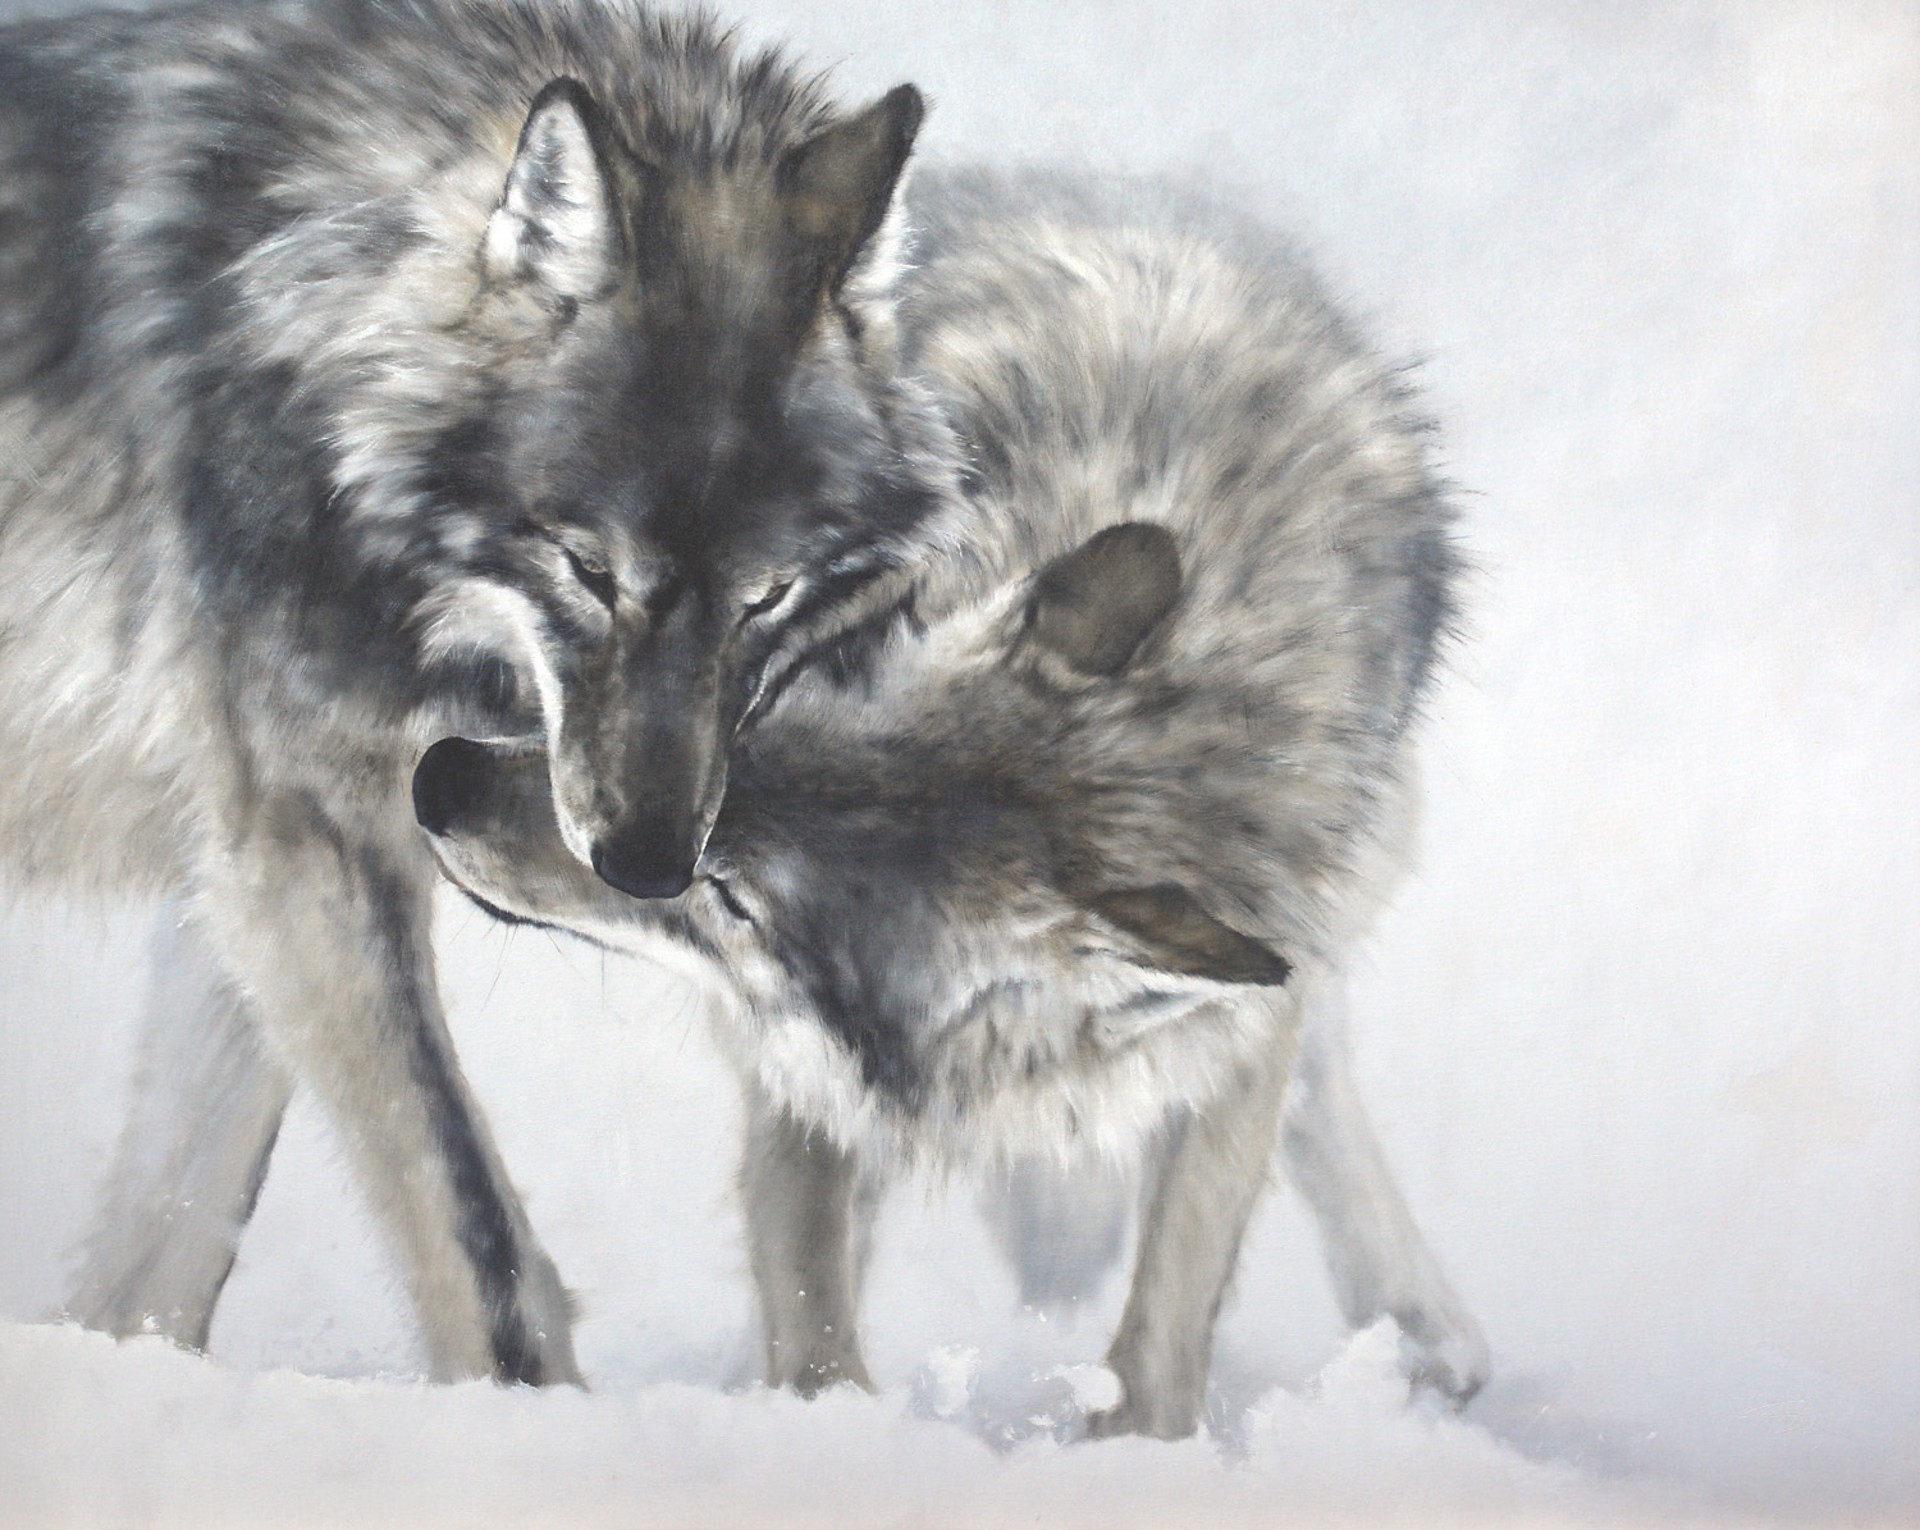 Oil Painting By Doyle Hostetler Of Two Gray Wolves Playing And Greeting Each Other 